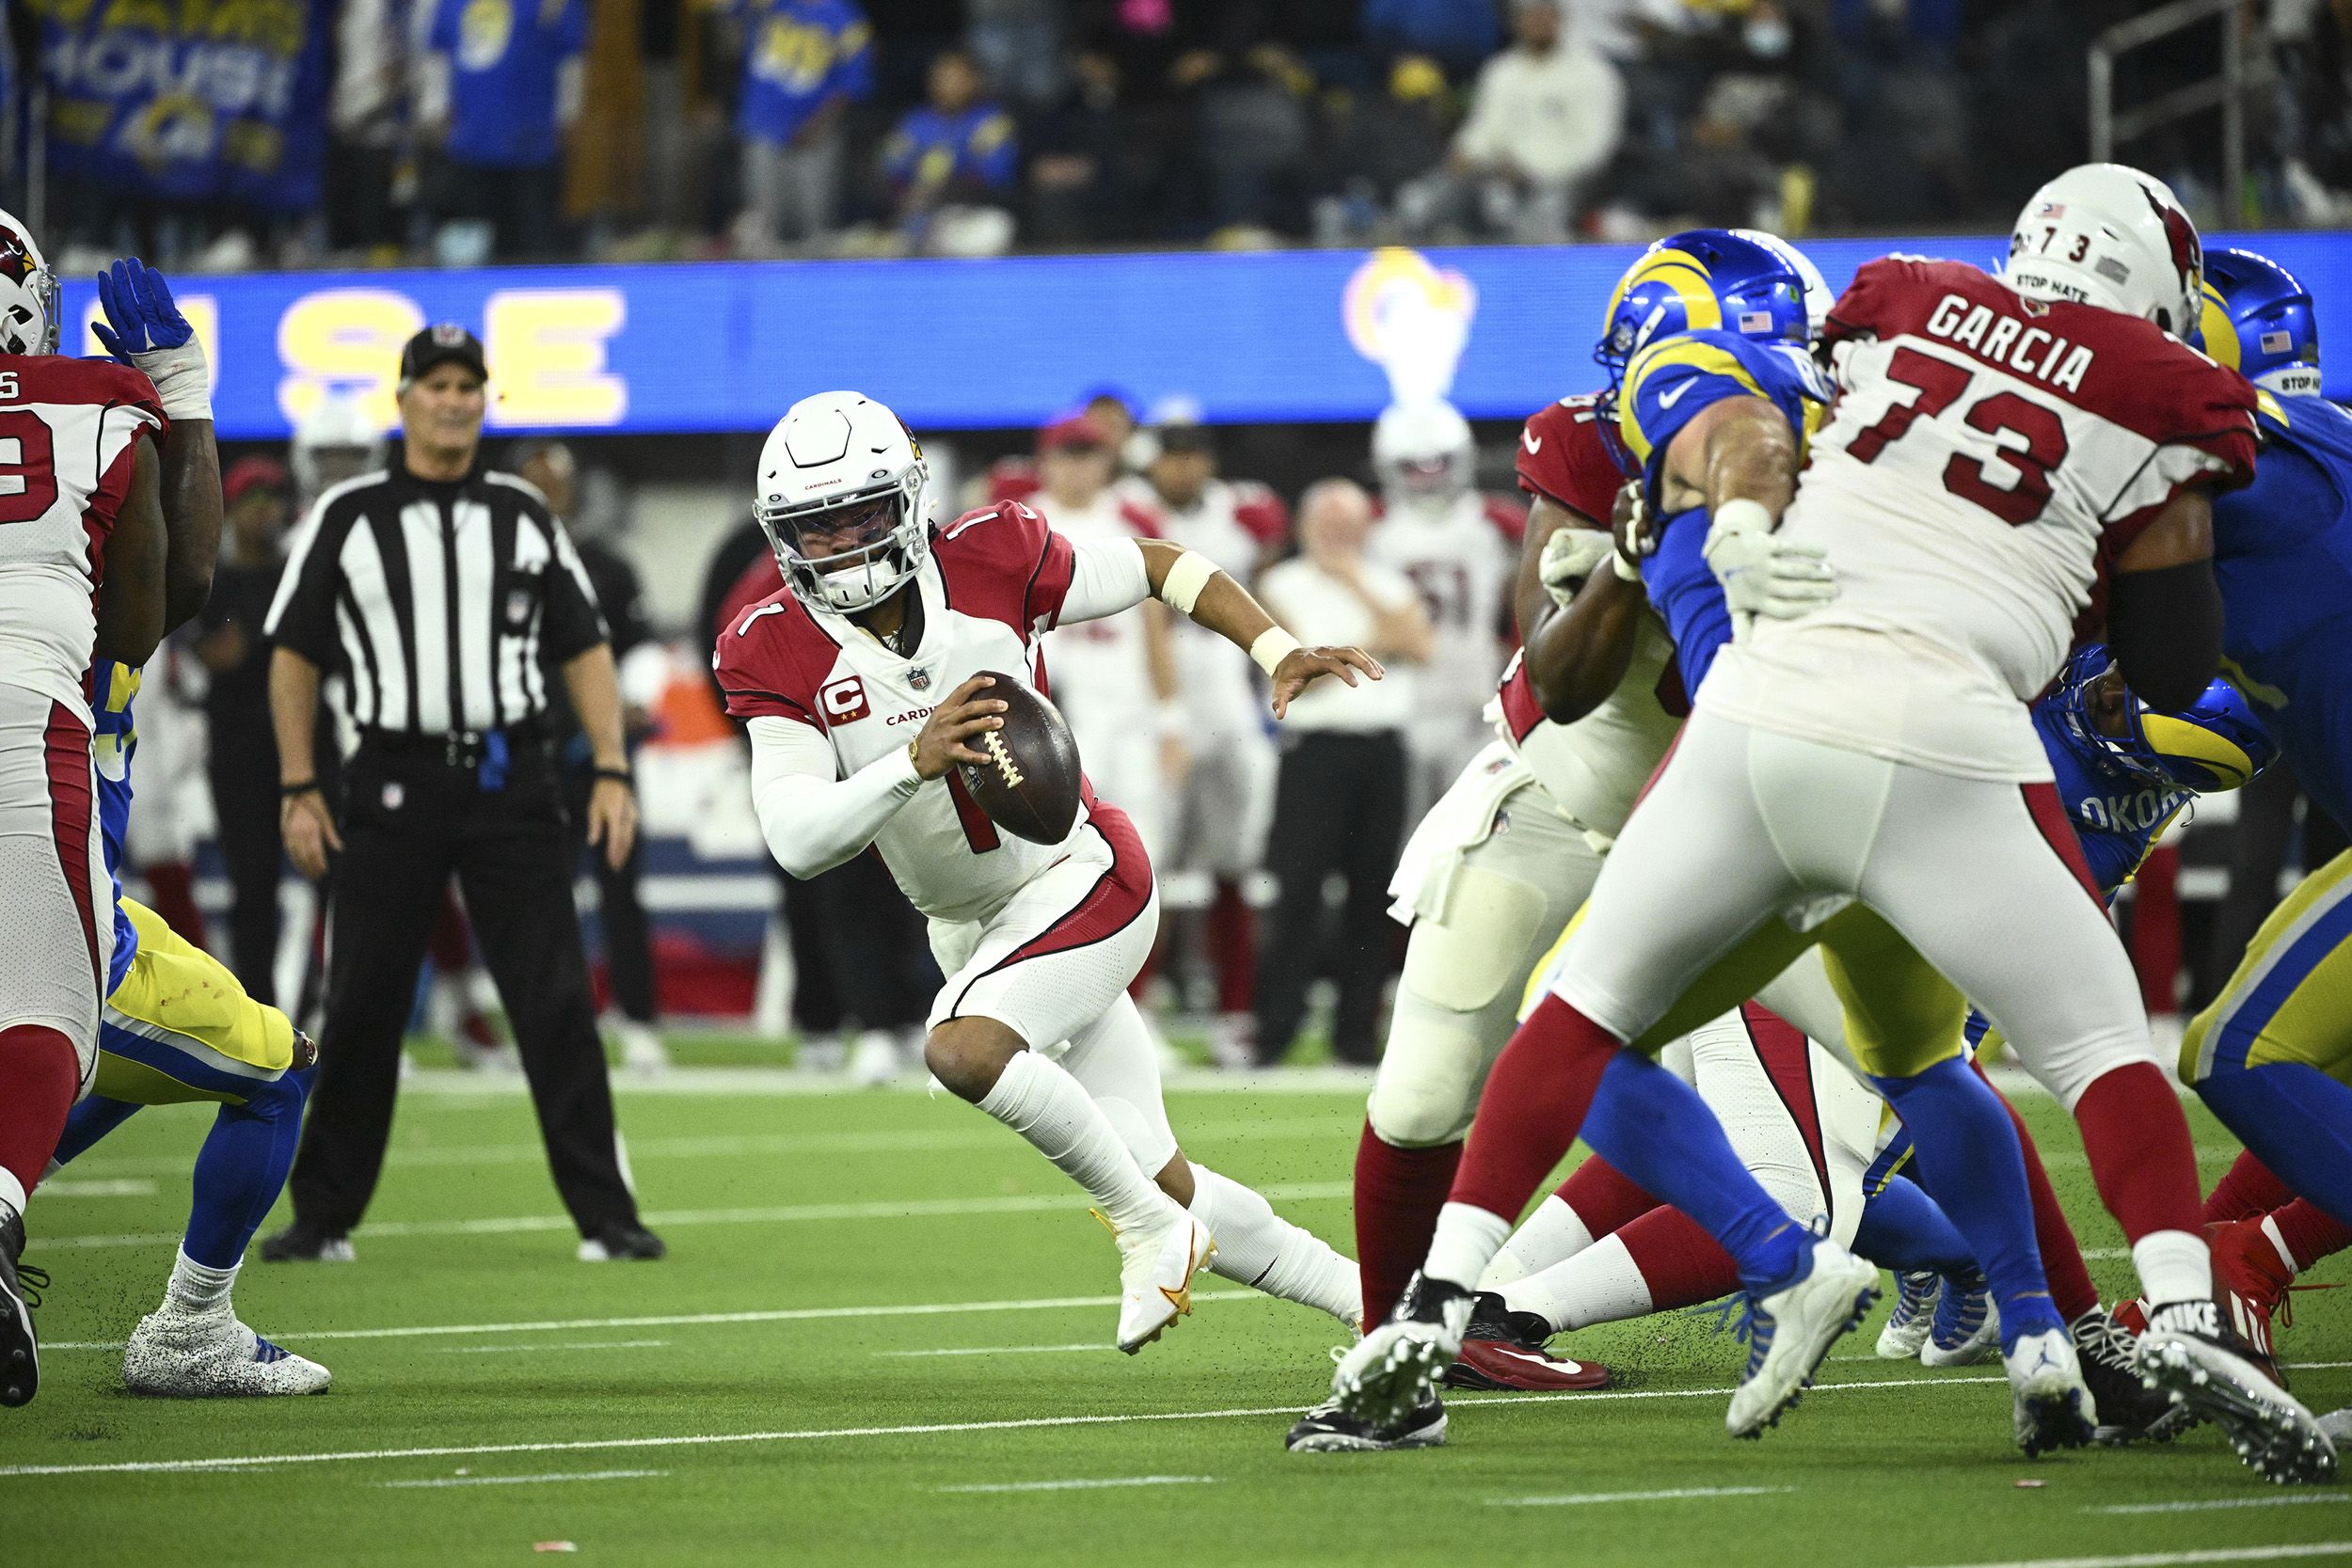 Cardinals pleased with Kyler Murray's work ethic, don't have designs to  'tank' for new franchise QB 